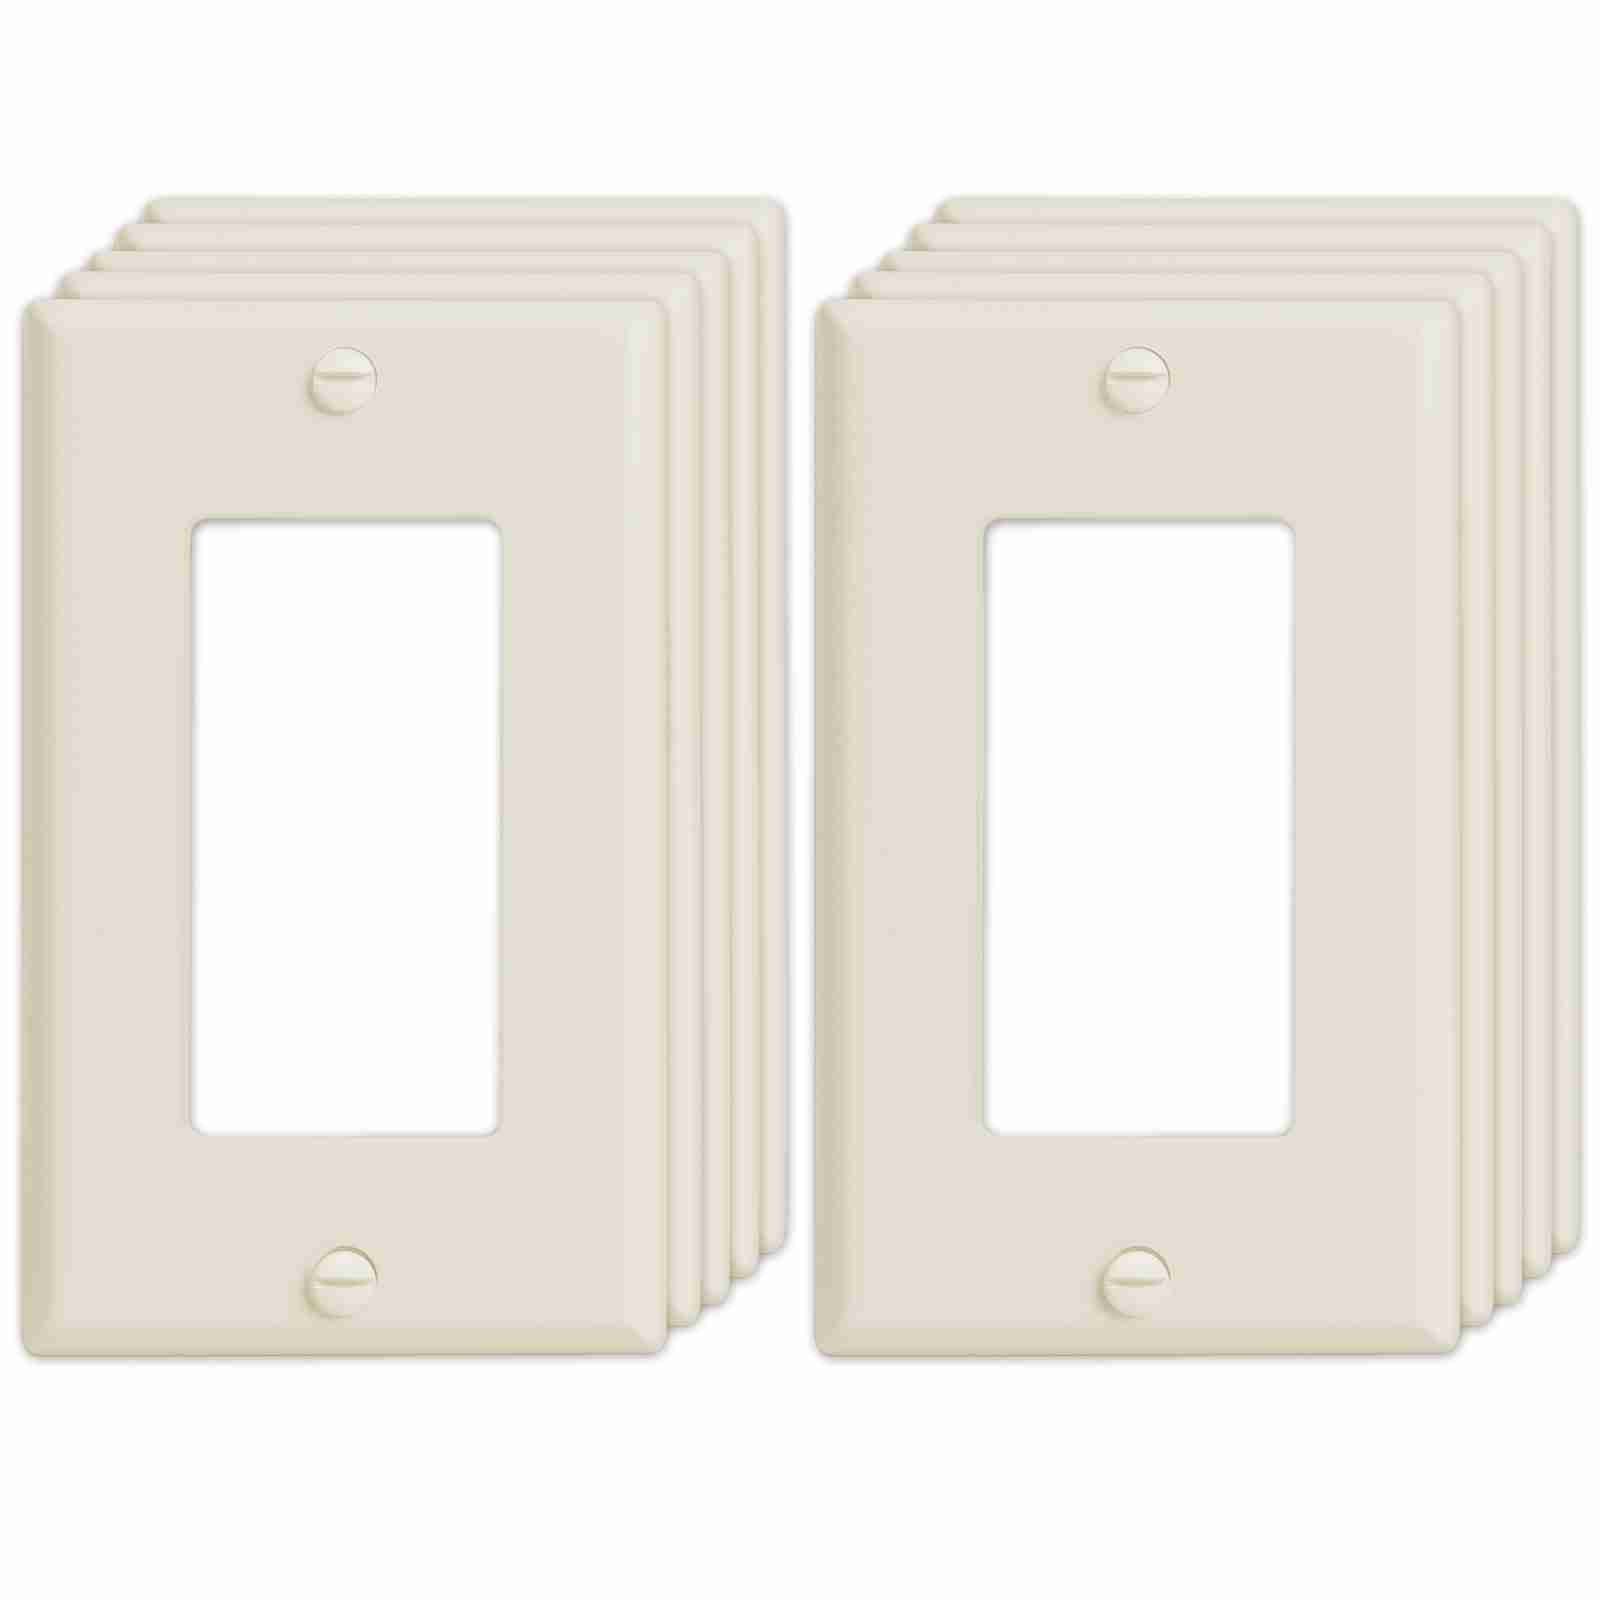 decorator-wall-plate-standard-size-1-gang-cover with cash back rebate